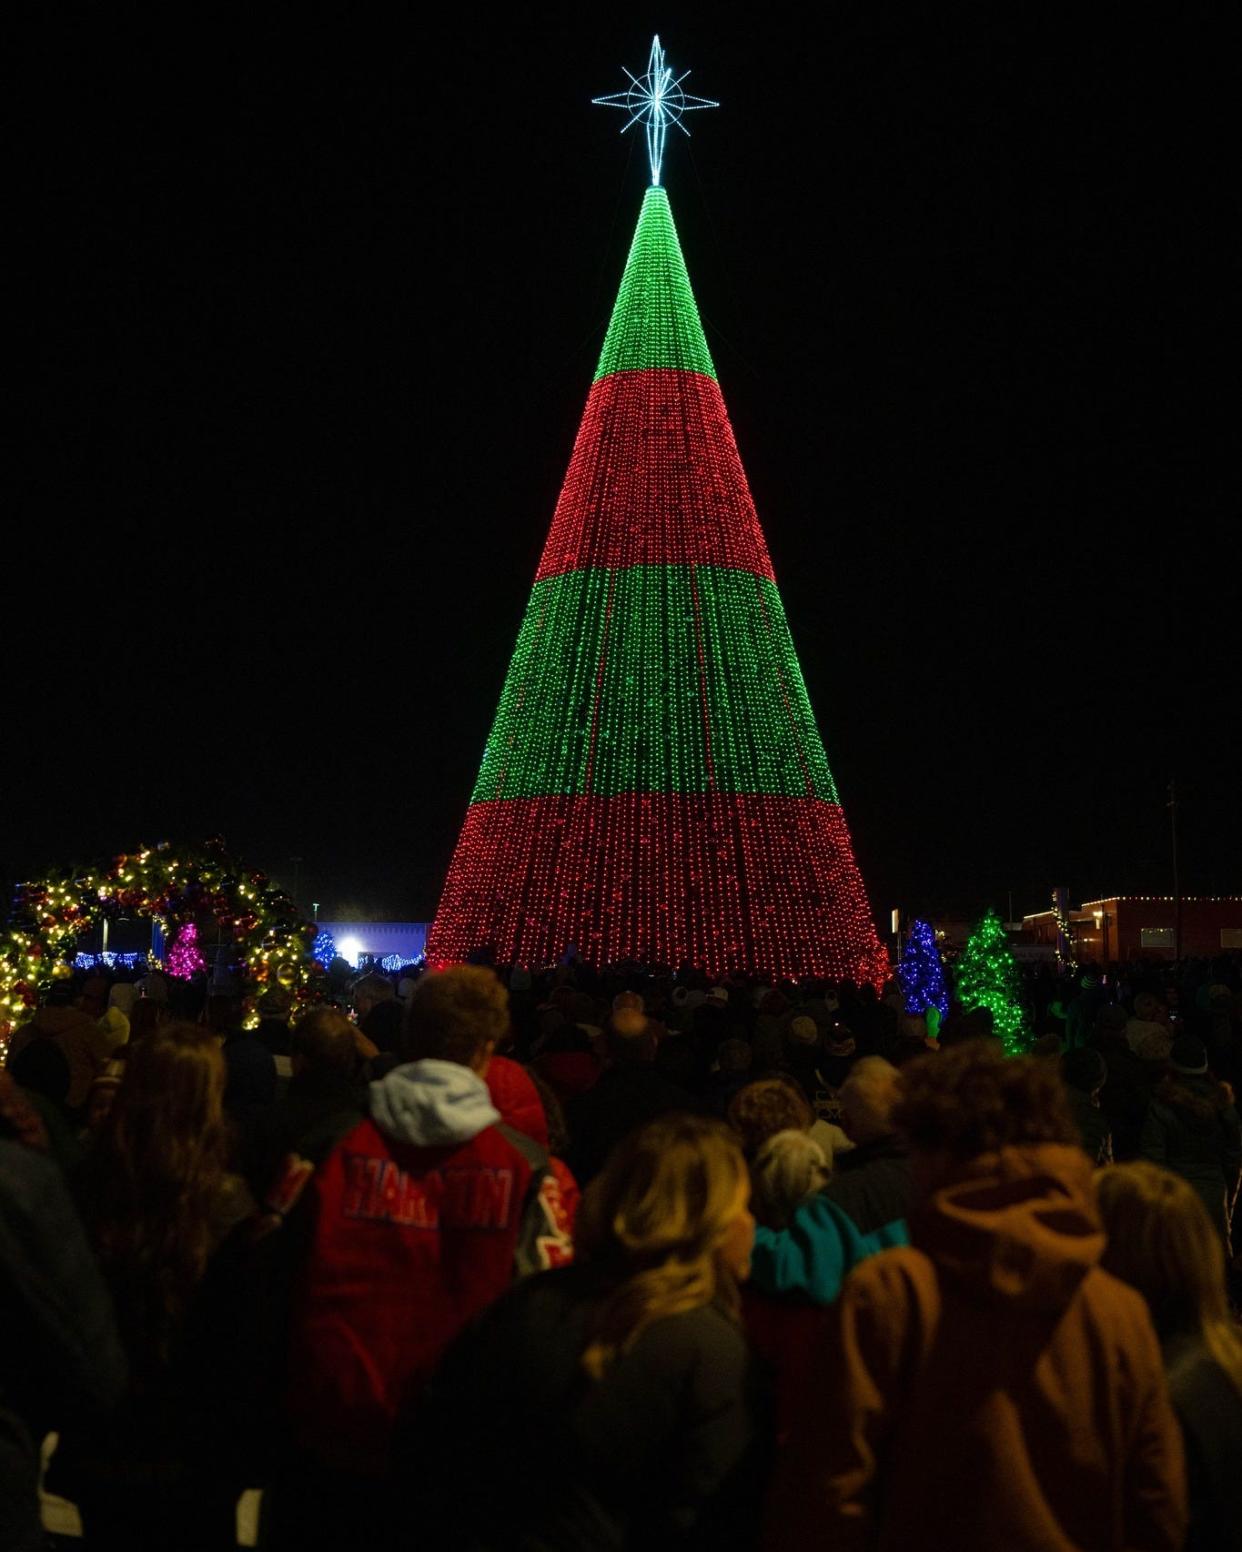 People attend the Dec. 3 opening-night festivities in Enid for The One: Bright Lights, a free multi-event holiday experience featuring what's billed as one of the world's tallest Christmas trees, dubbed the "Christ Tree." This year's Christ Tree is a steel 102-foot-tall conifer adorned with a 20-foot Bethlehem star and 35,000 LED lights choreographed to Christmas songs.